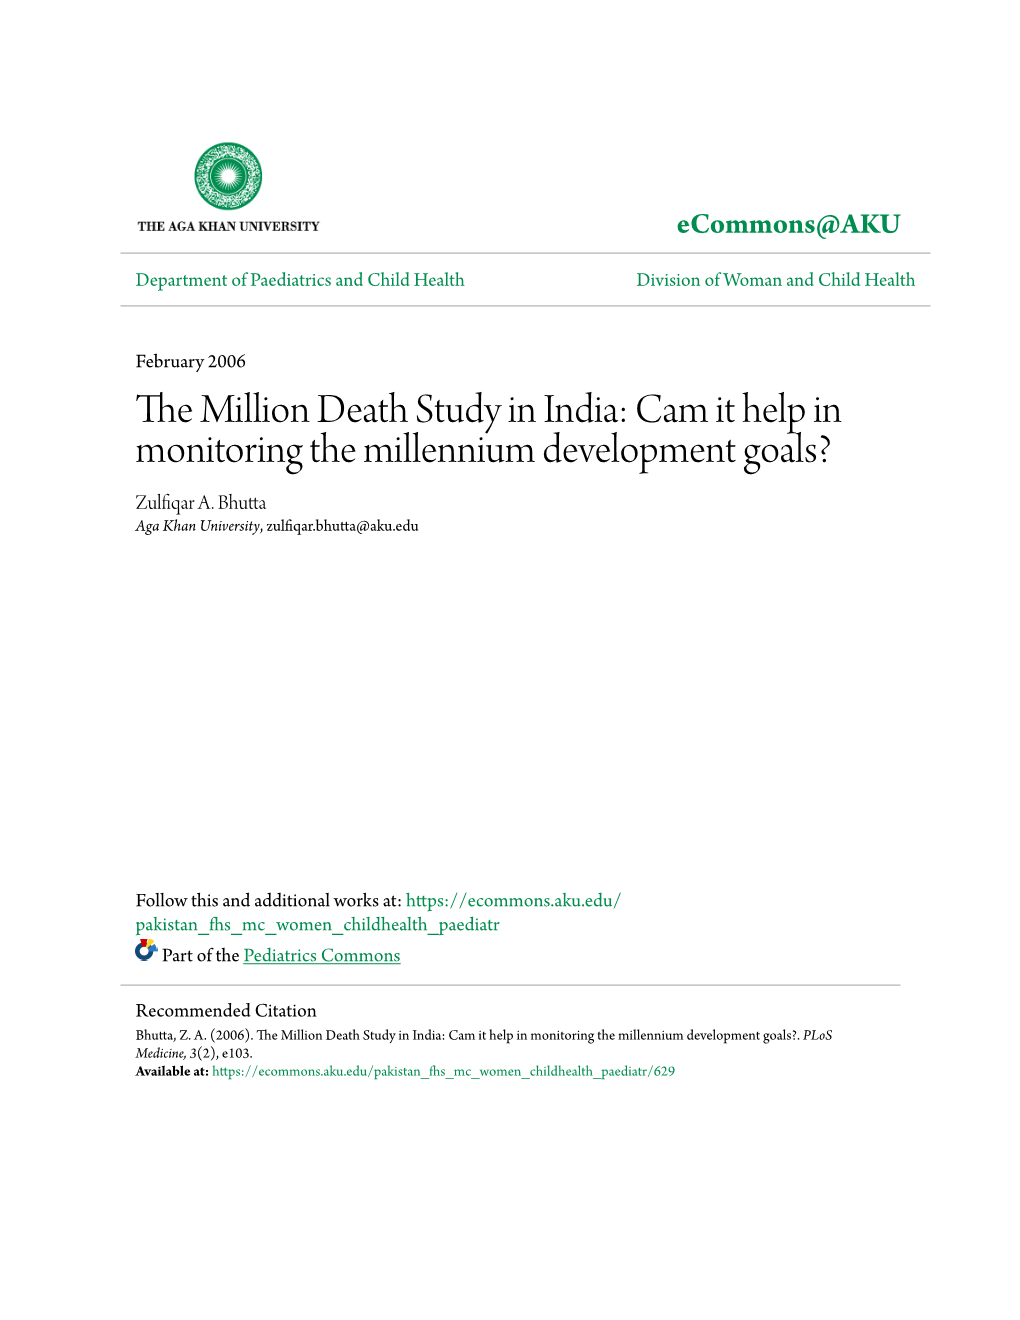 The Million Death Study in India: Can It Help in Monitoring the Millennium Development Goals? Zulﬁ Qar A